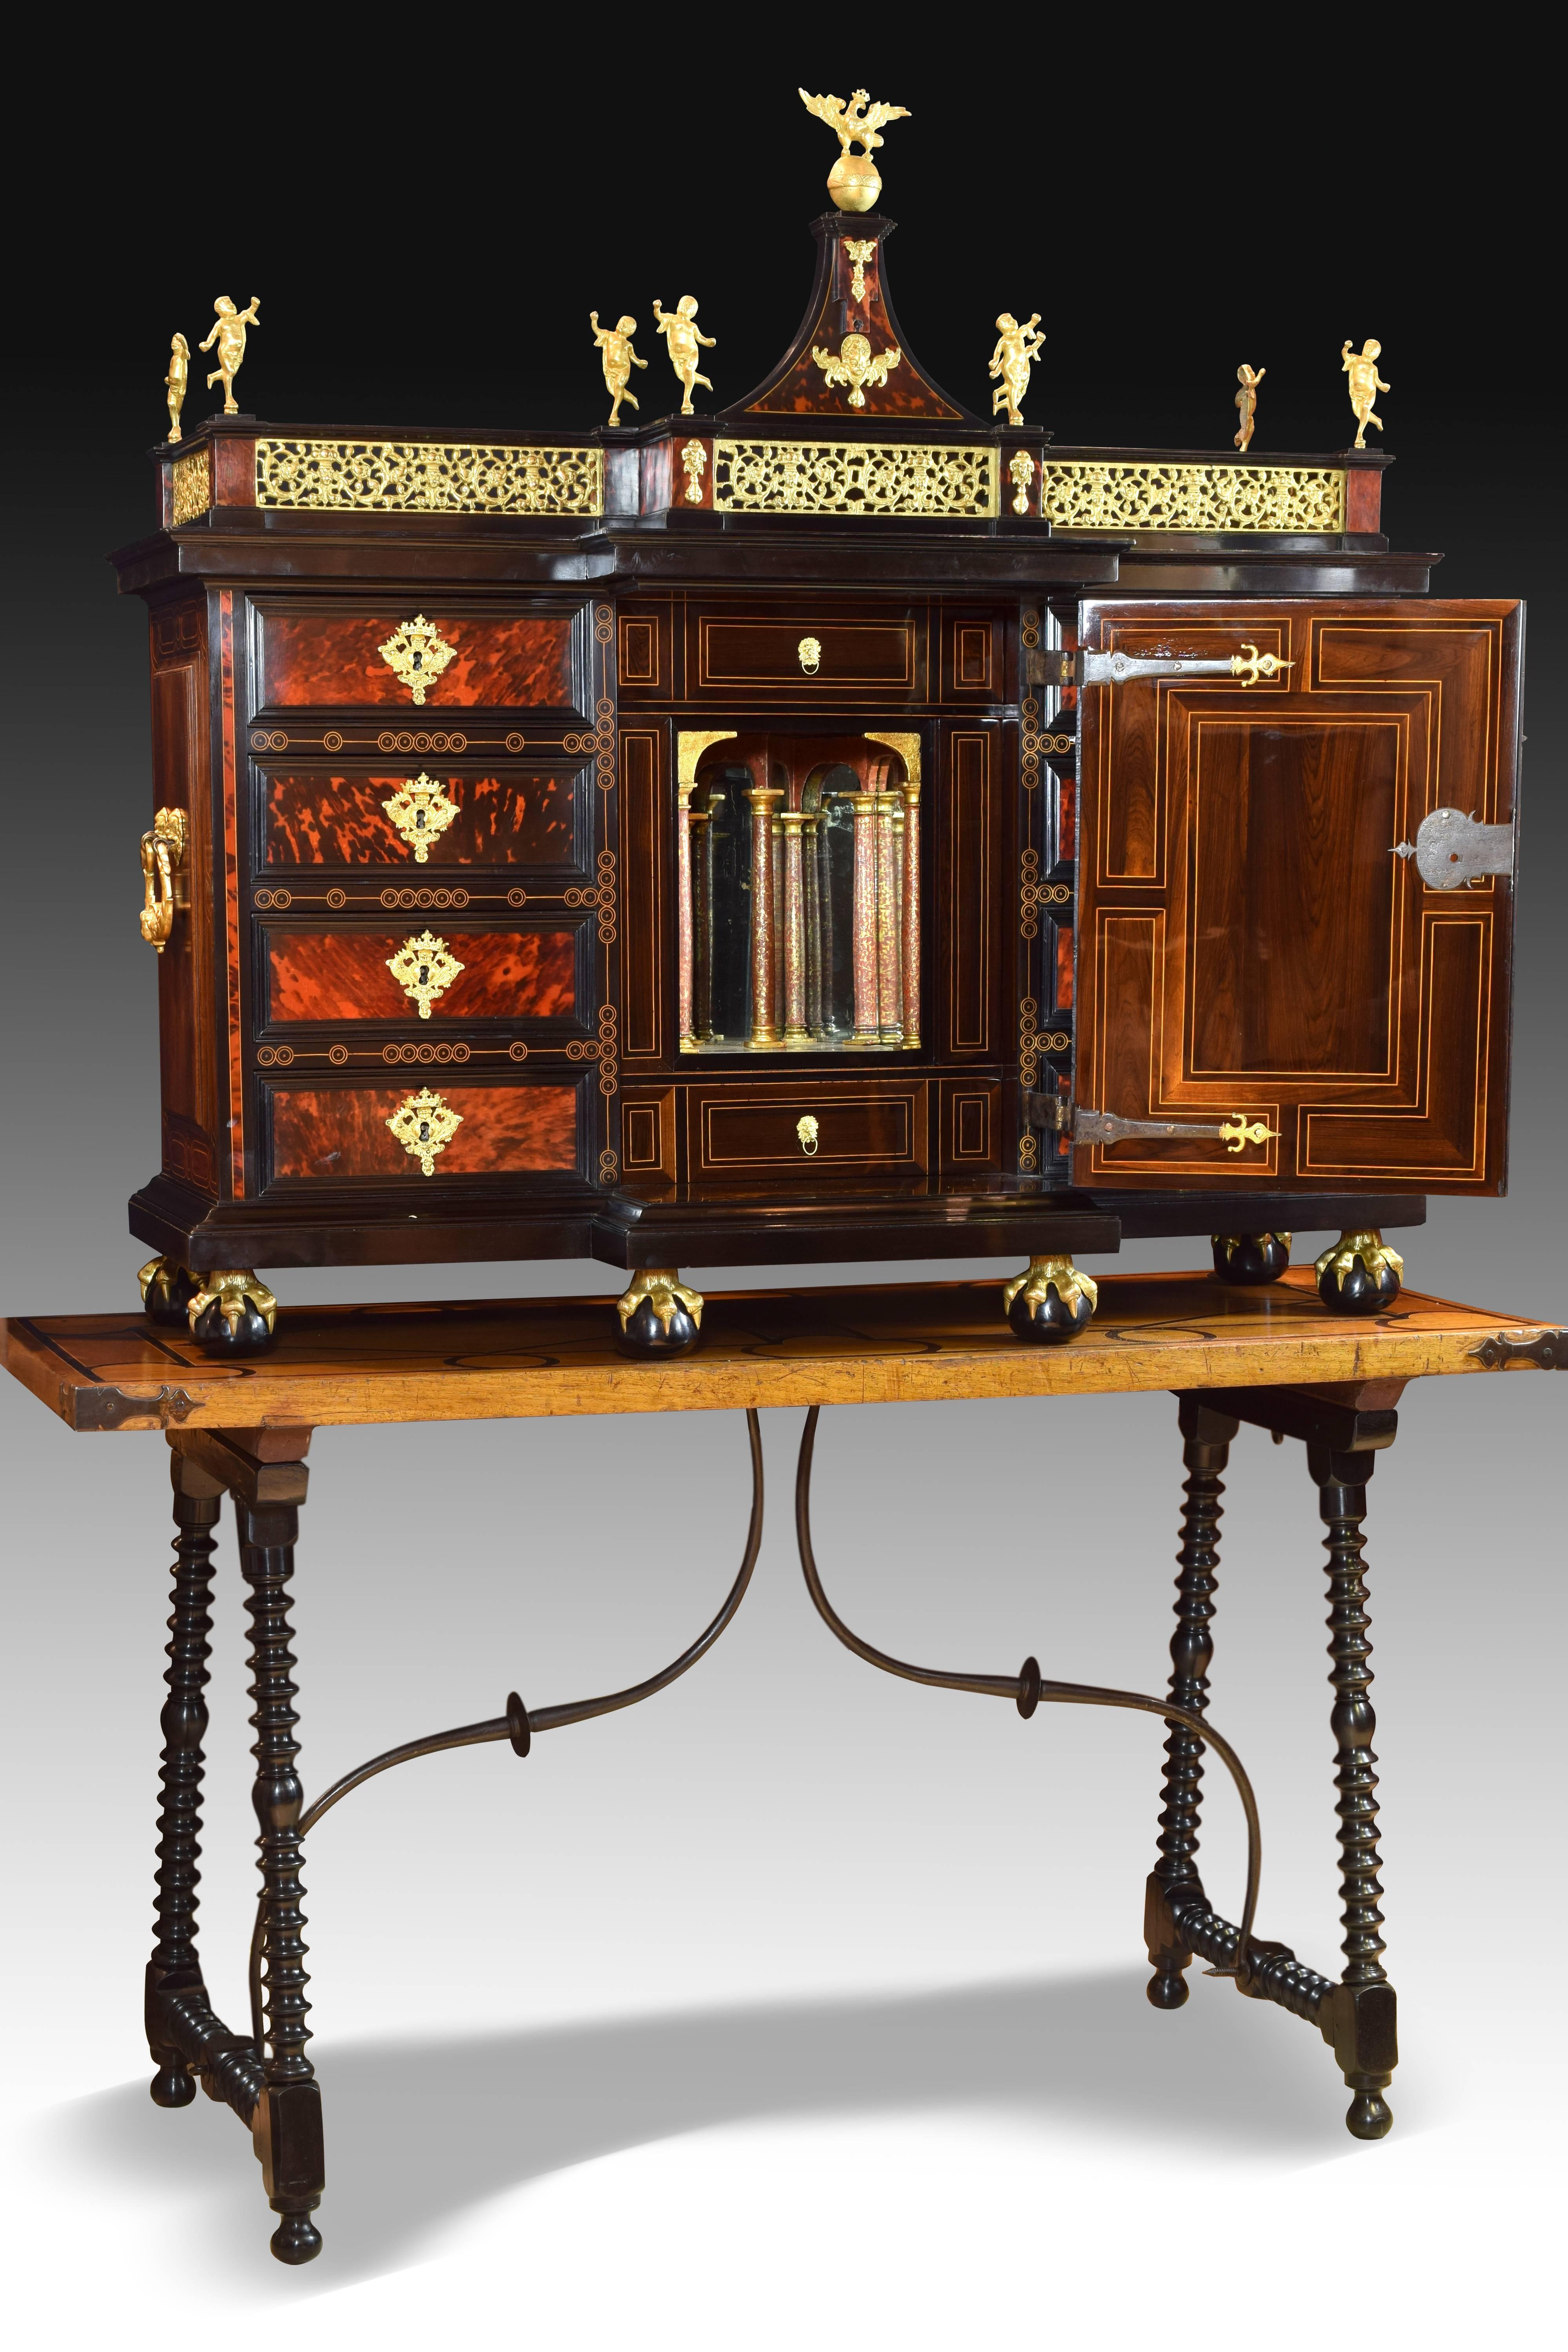 Italian cabinet in tortoise shell, wood and gilded bronze, wood of rosewood, lemongrass and iron fasteners. 17th century. Table with walnut board.
Uncovered sample desk located on eight claws with ball and two handles on the sides. The front